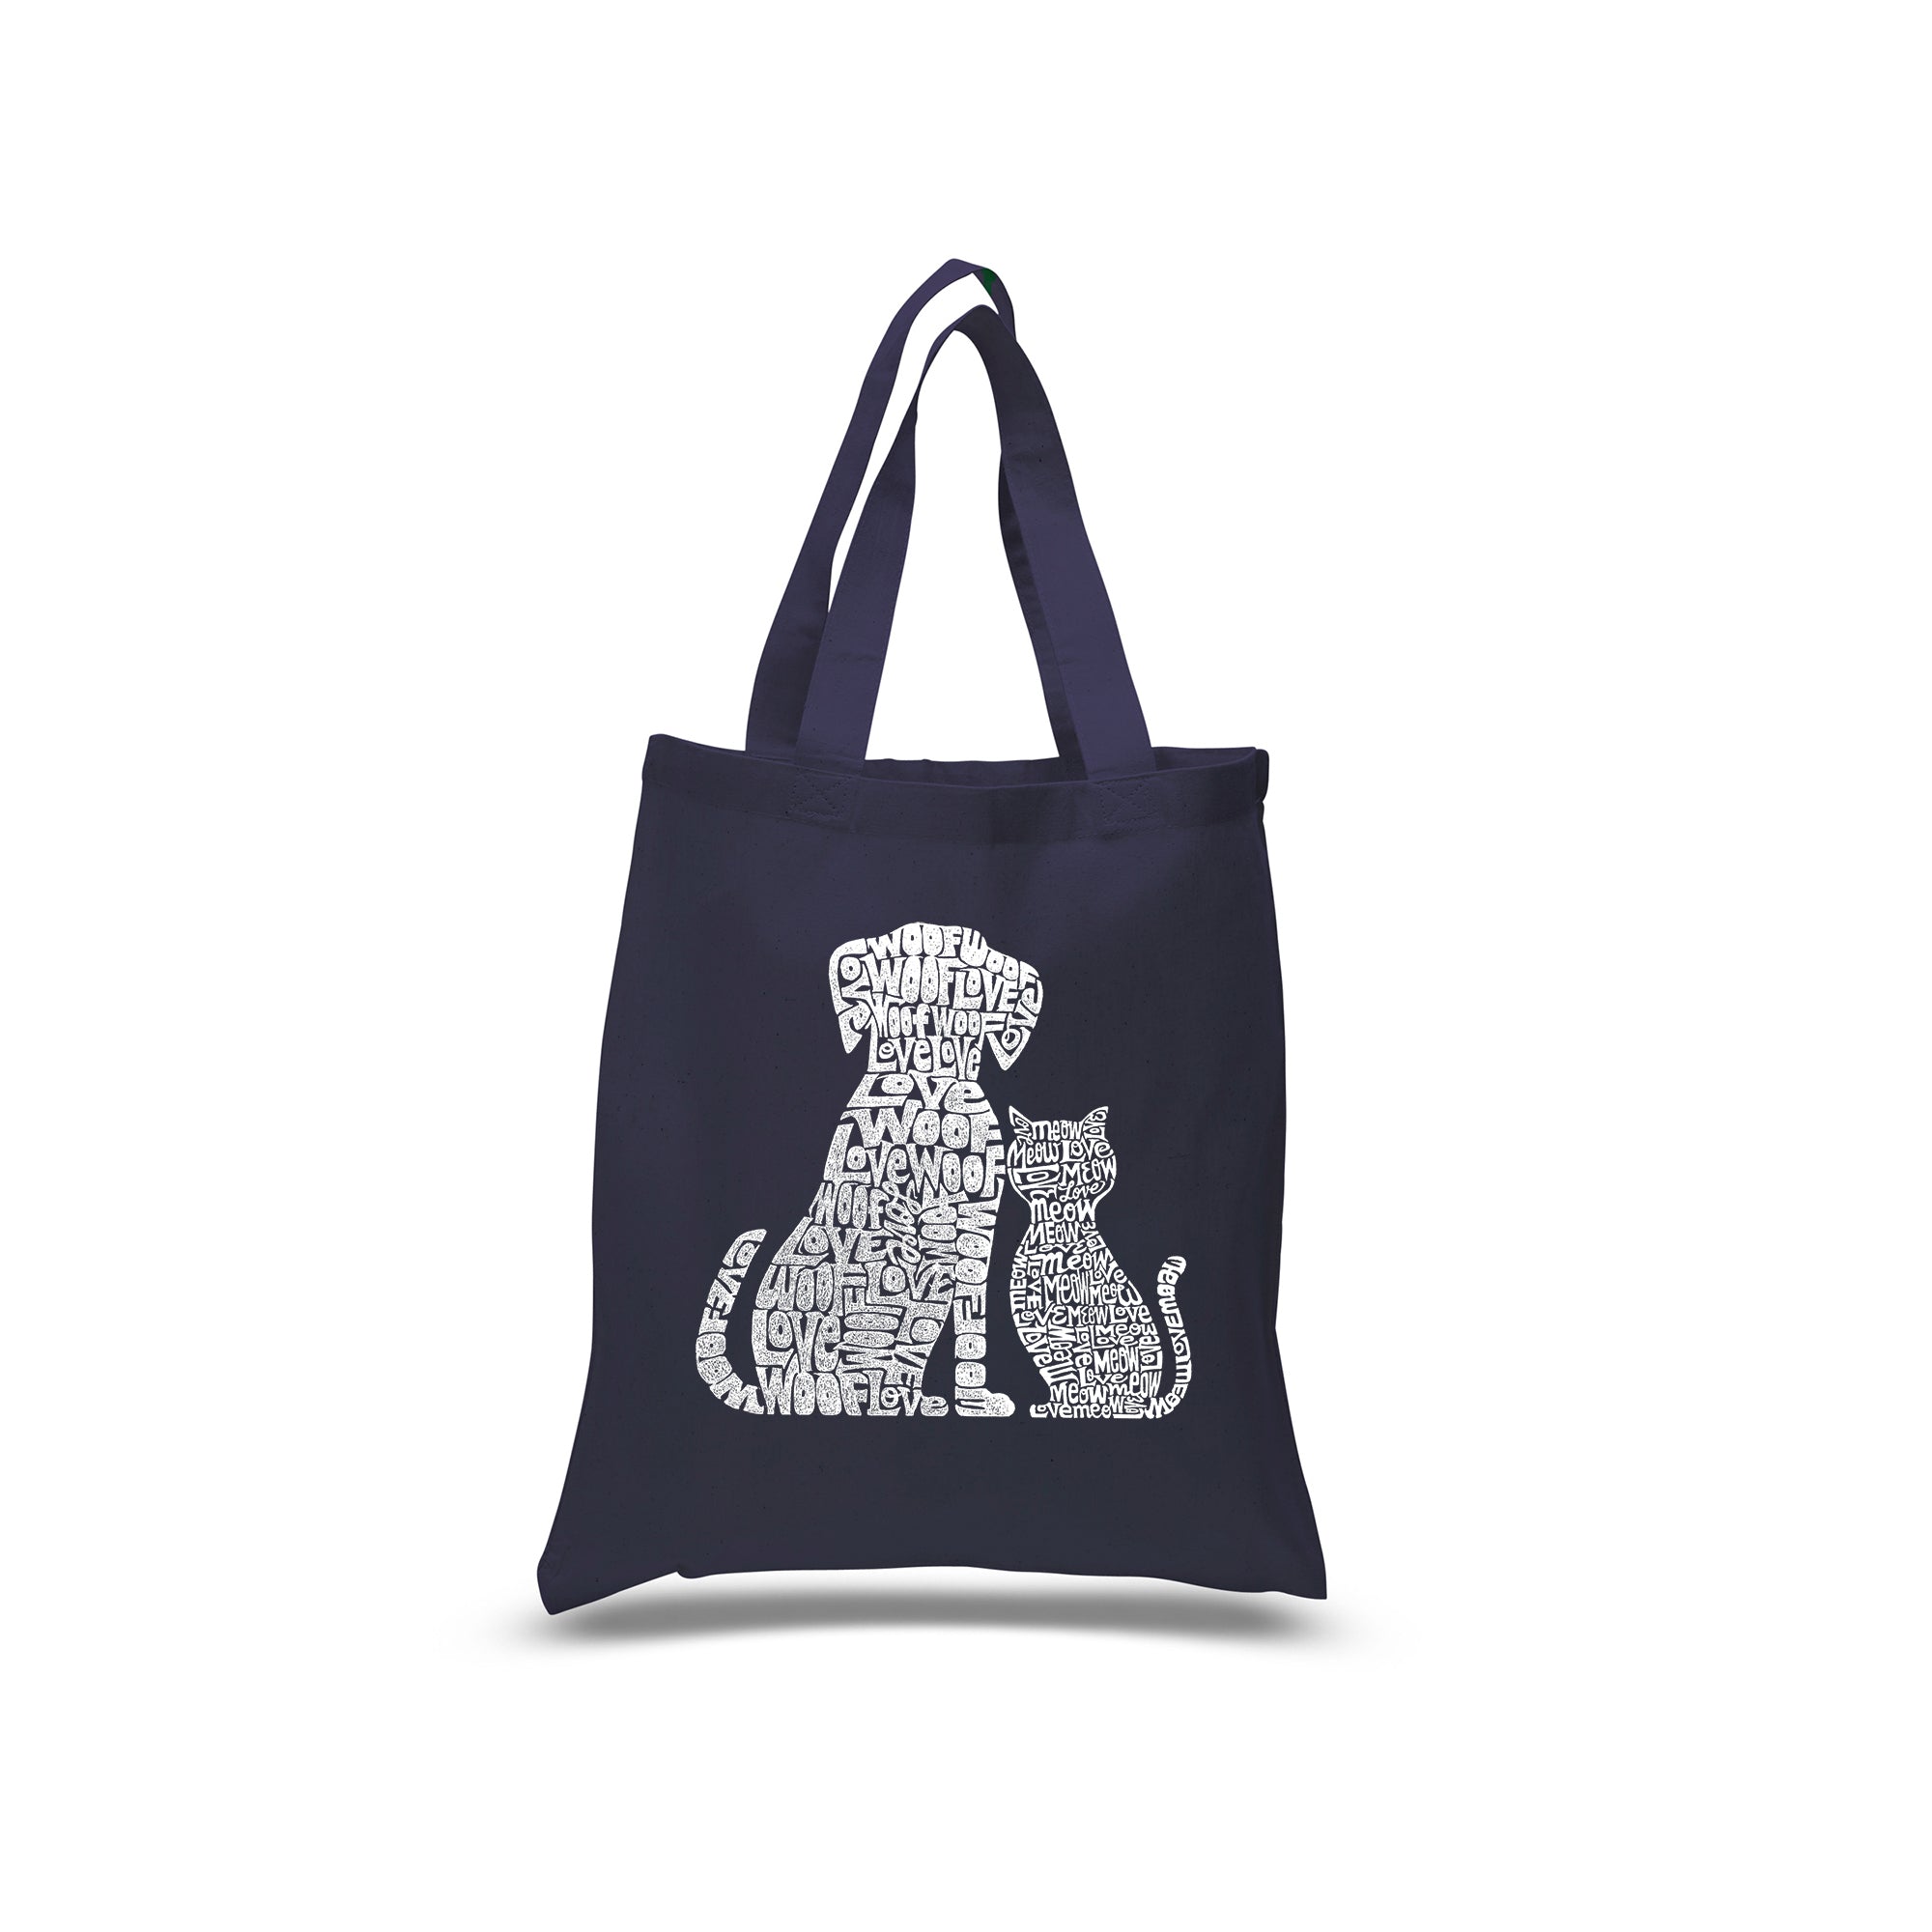 Small Word Art Tote Bag - Dogs And Cats - Navy - Small